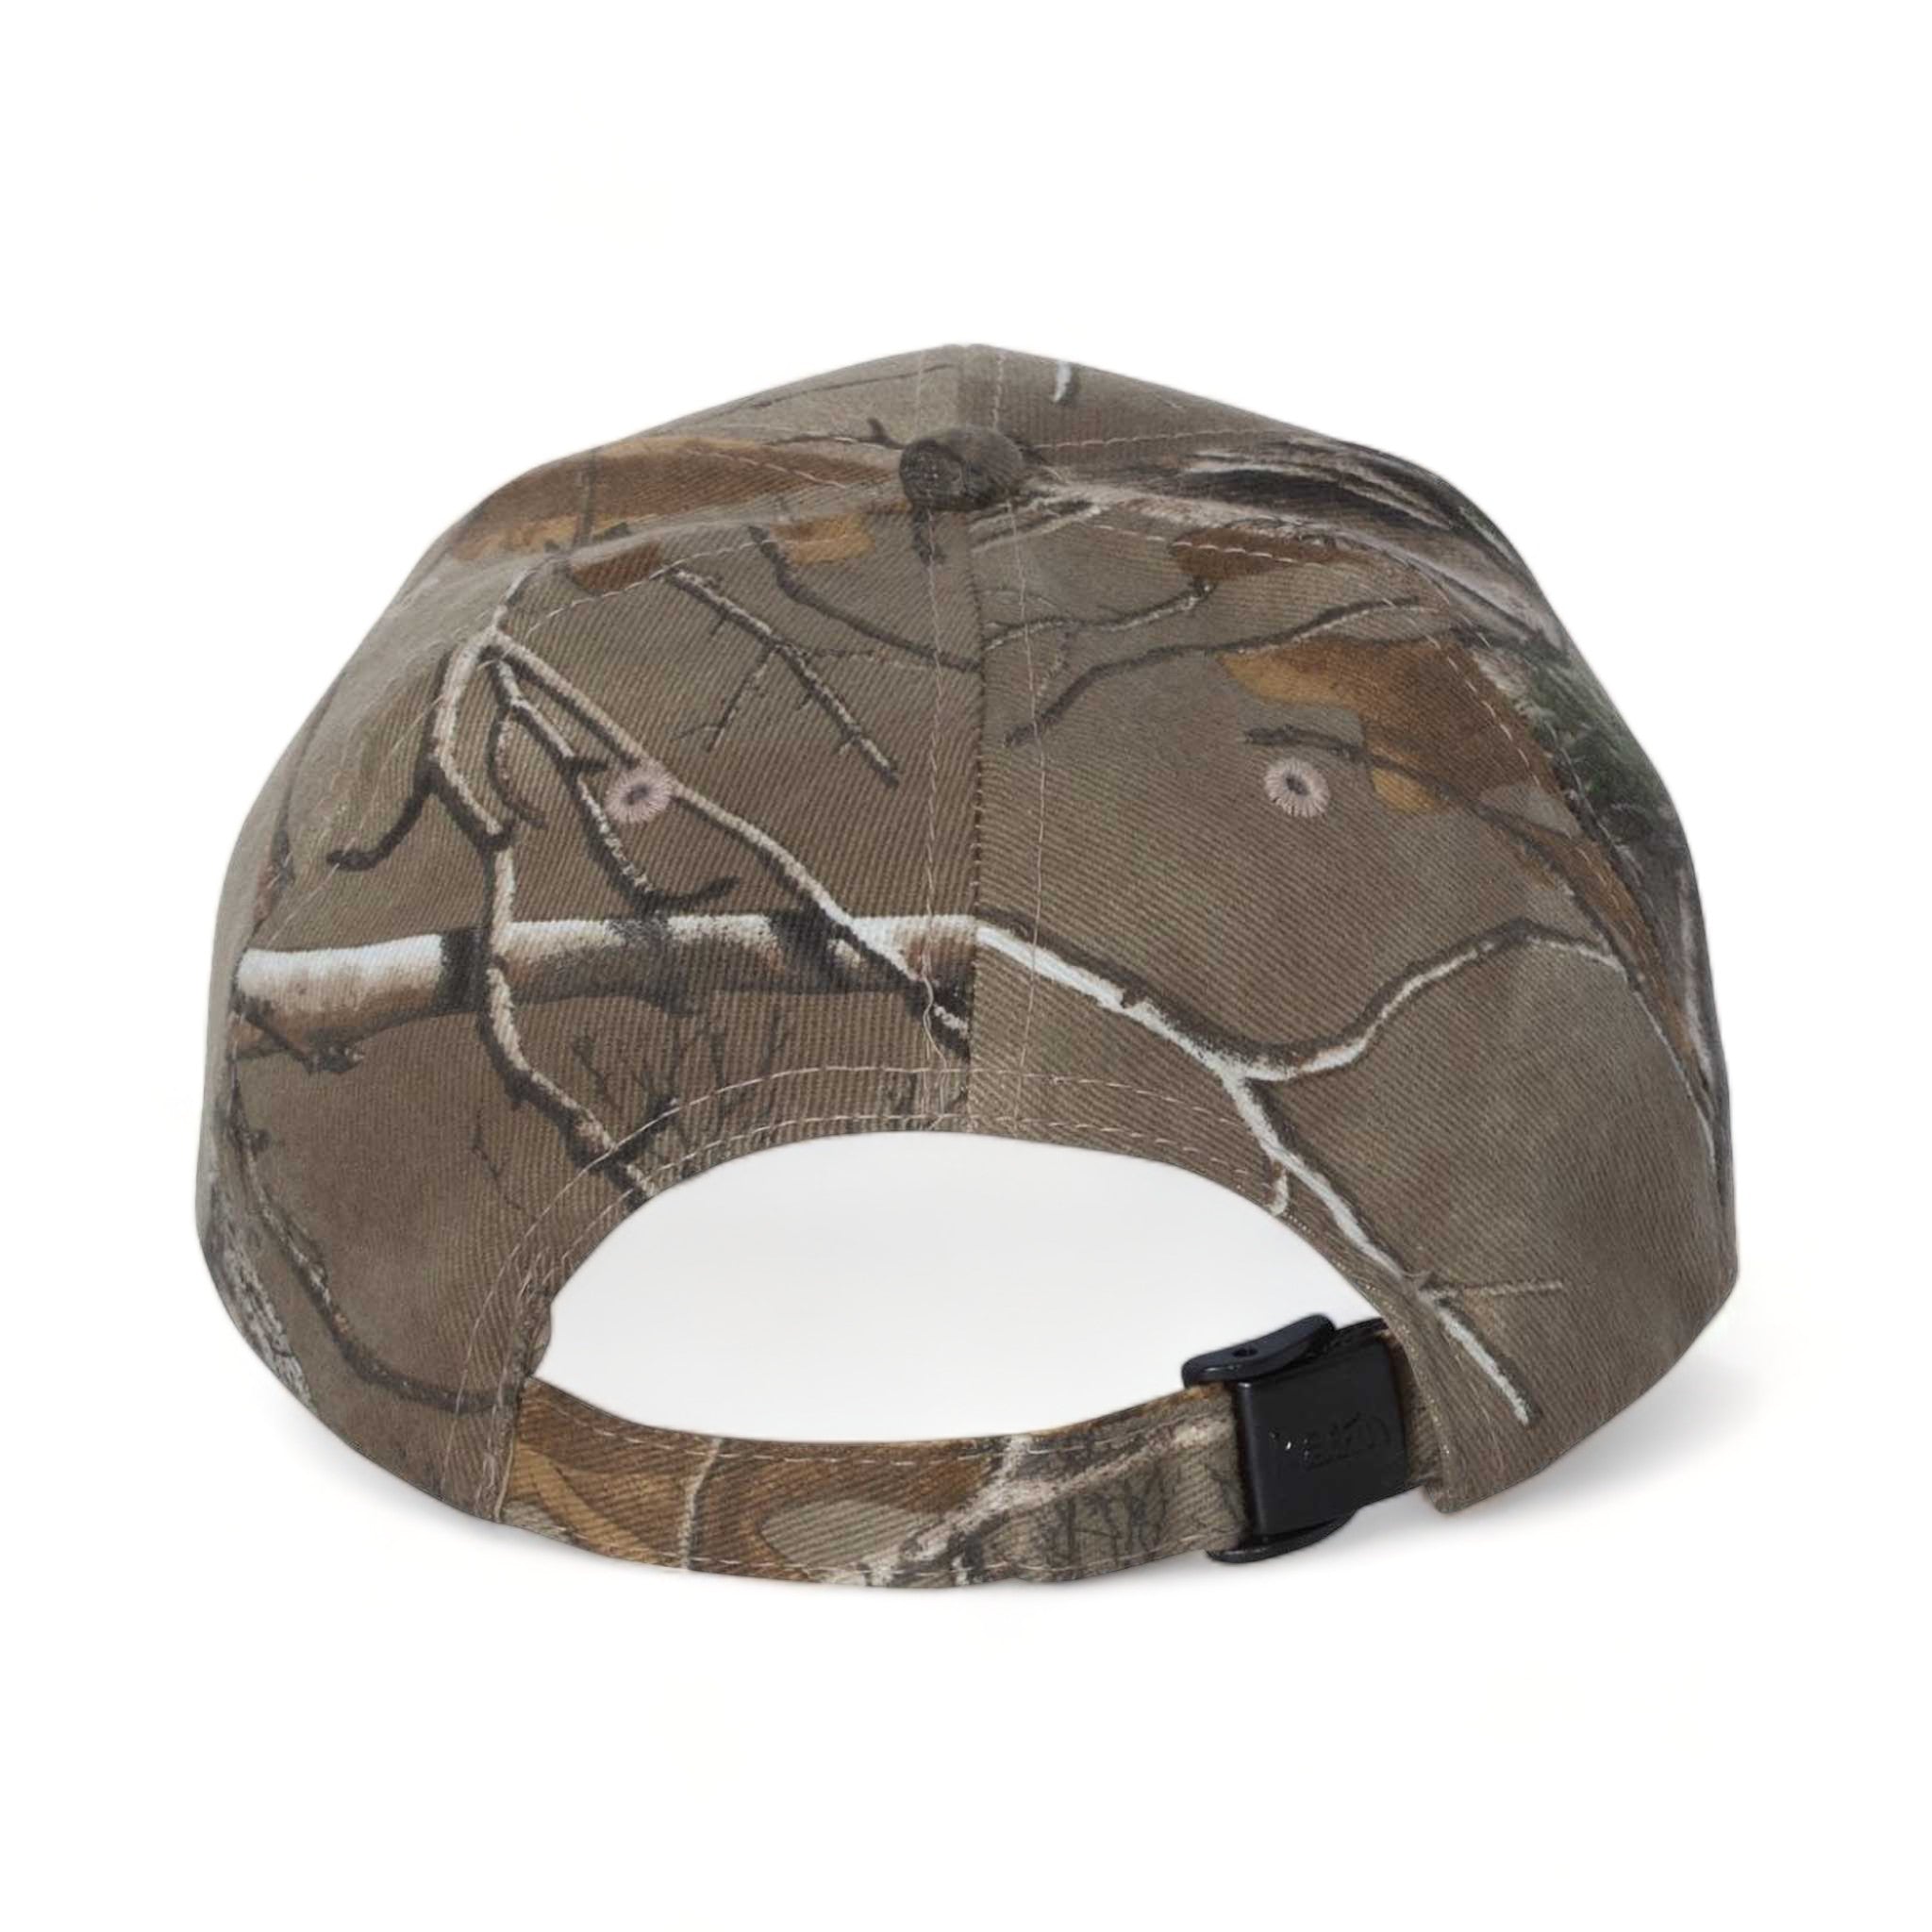 Back view of Kati LC10 custom hat in realtree xtra